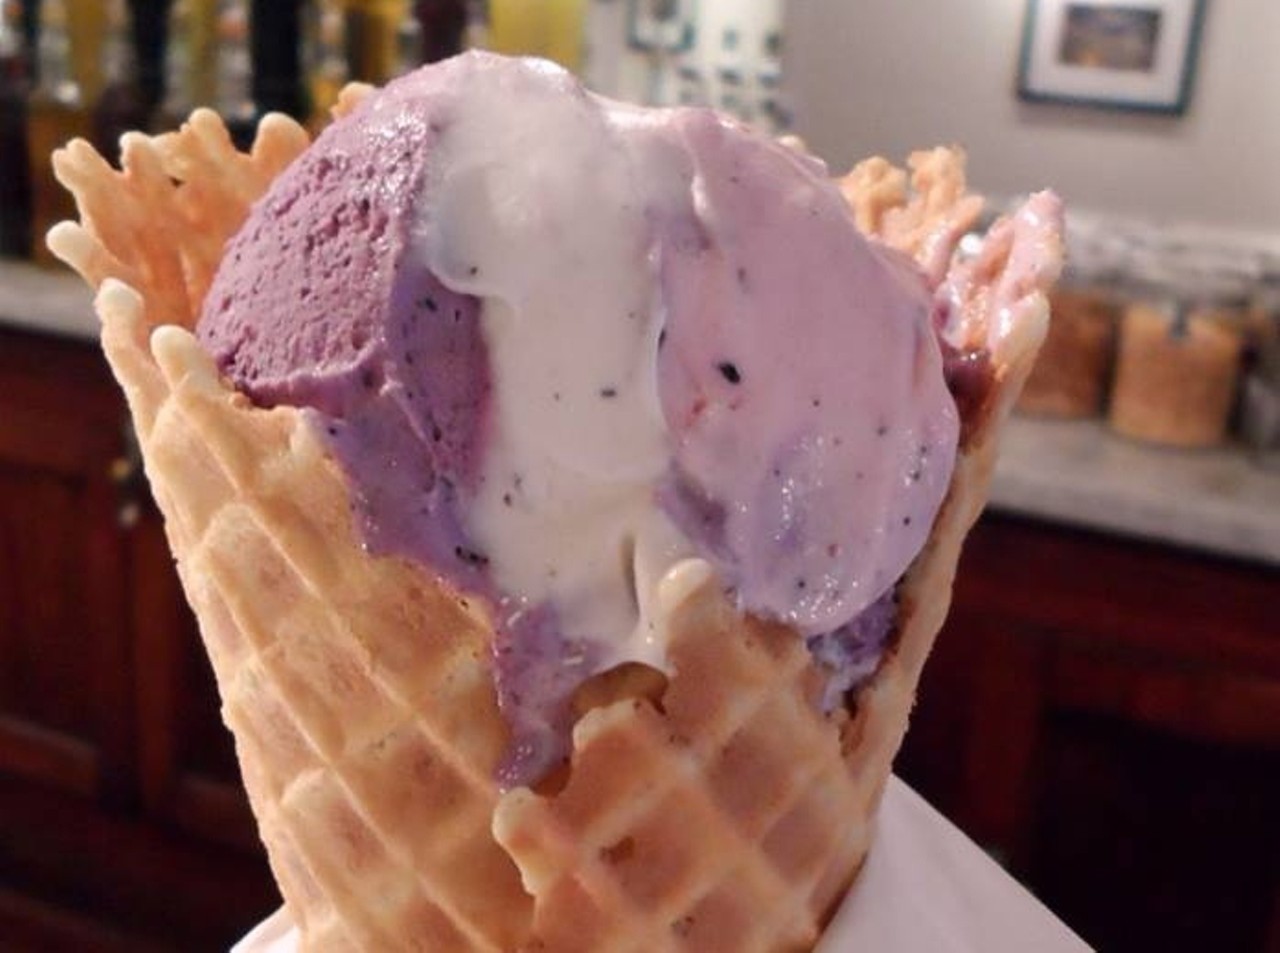 13 Nearby Places to get Incredible Ice Cream